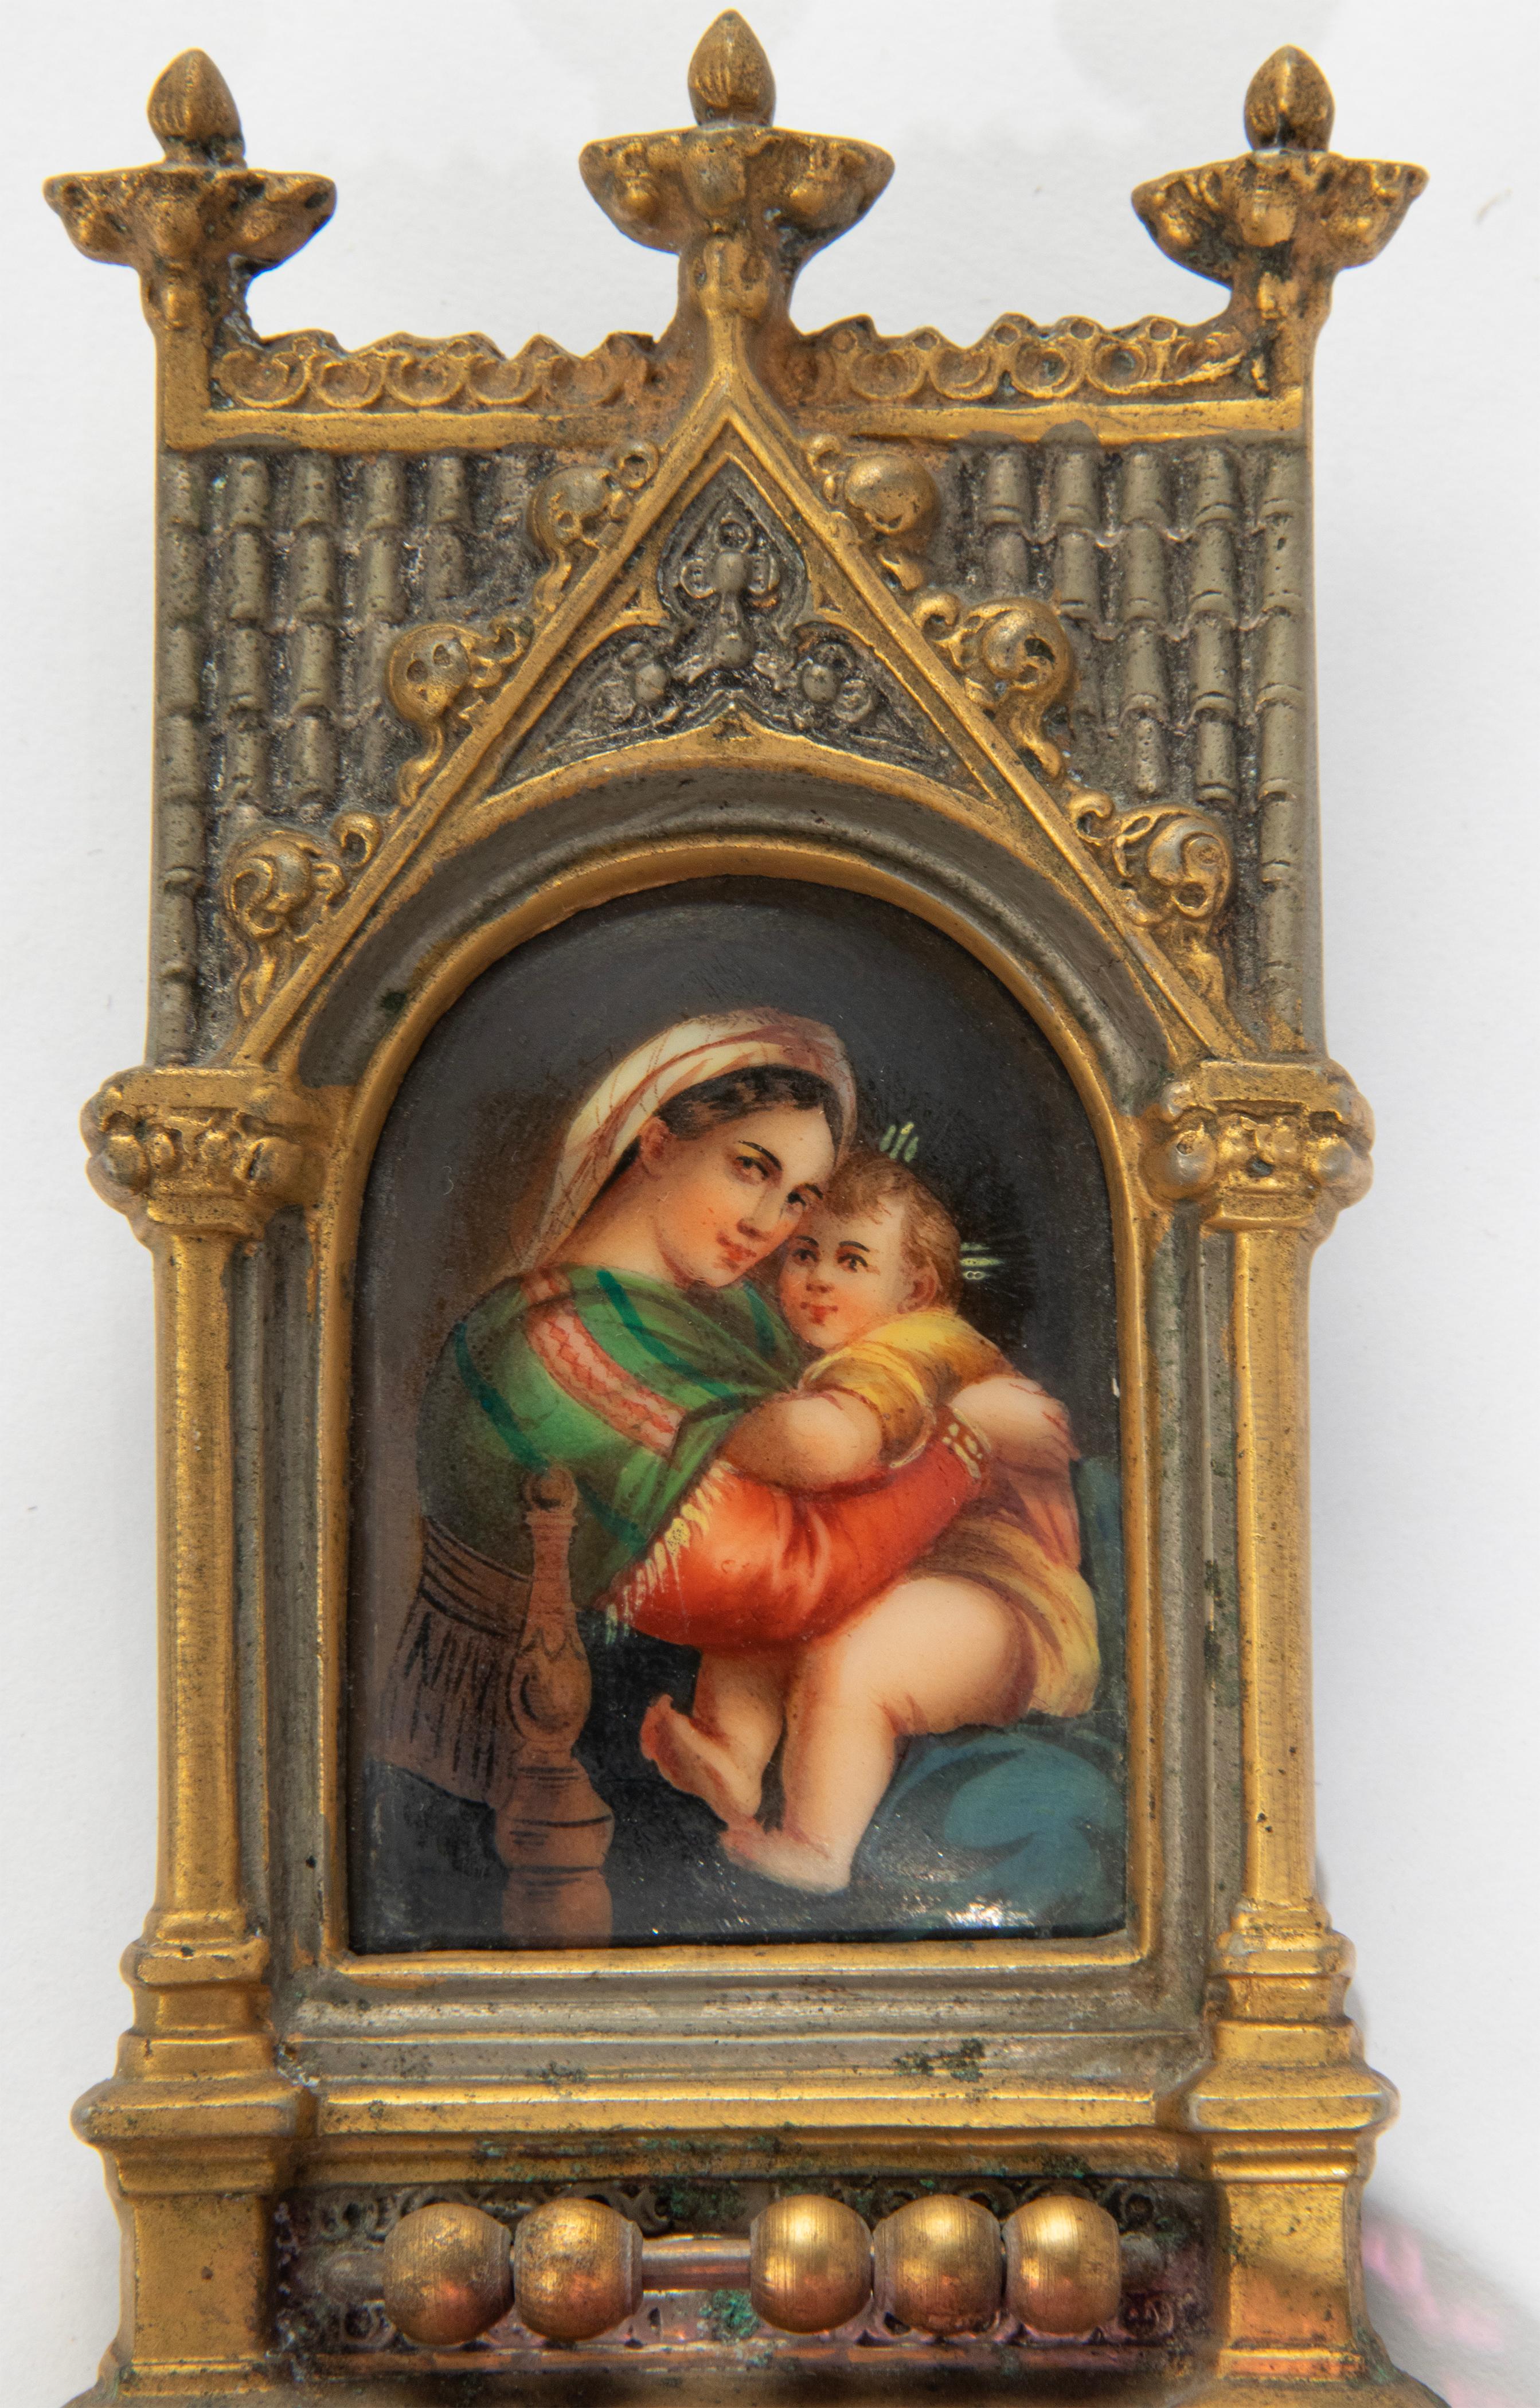 An antique holy water font in Gothic style, made of gilt bronze with a cranberry glass font. In the center there is refined hand-painted panel depicting Mary with baby Jesus, painted on porcelain. Made in France, around 1870-1880. It was the second